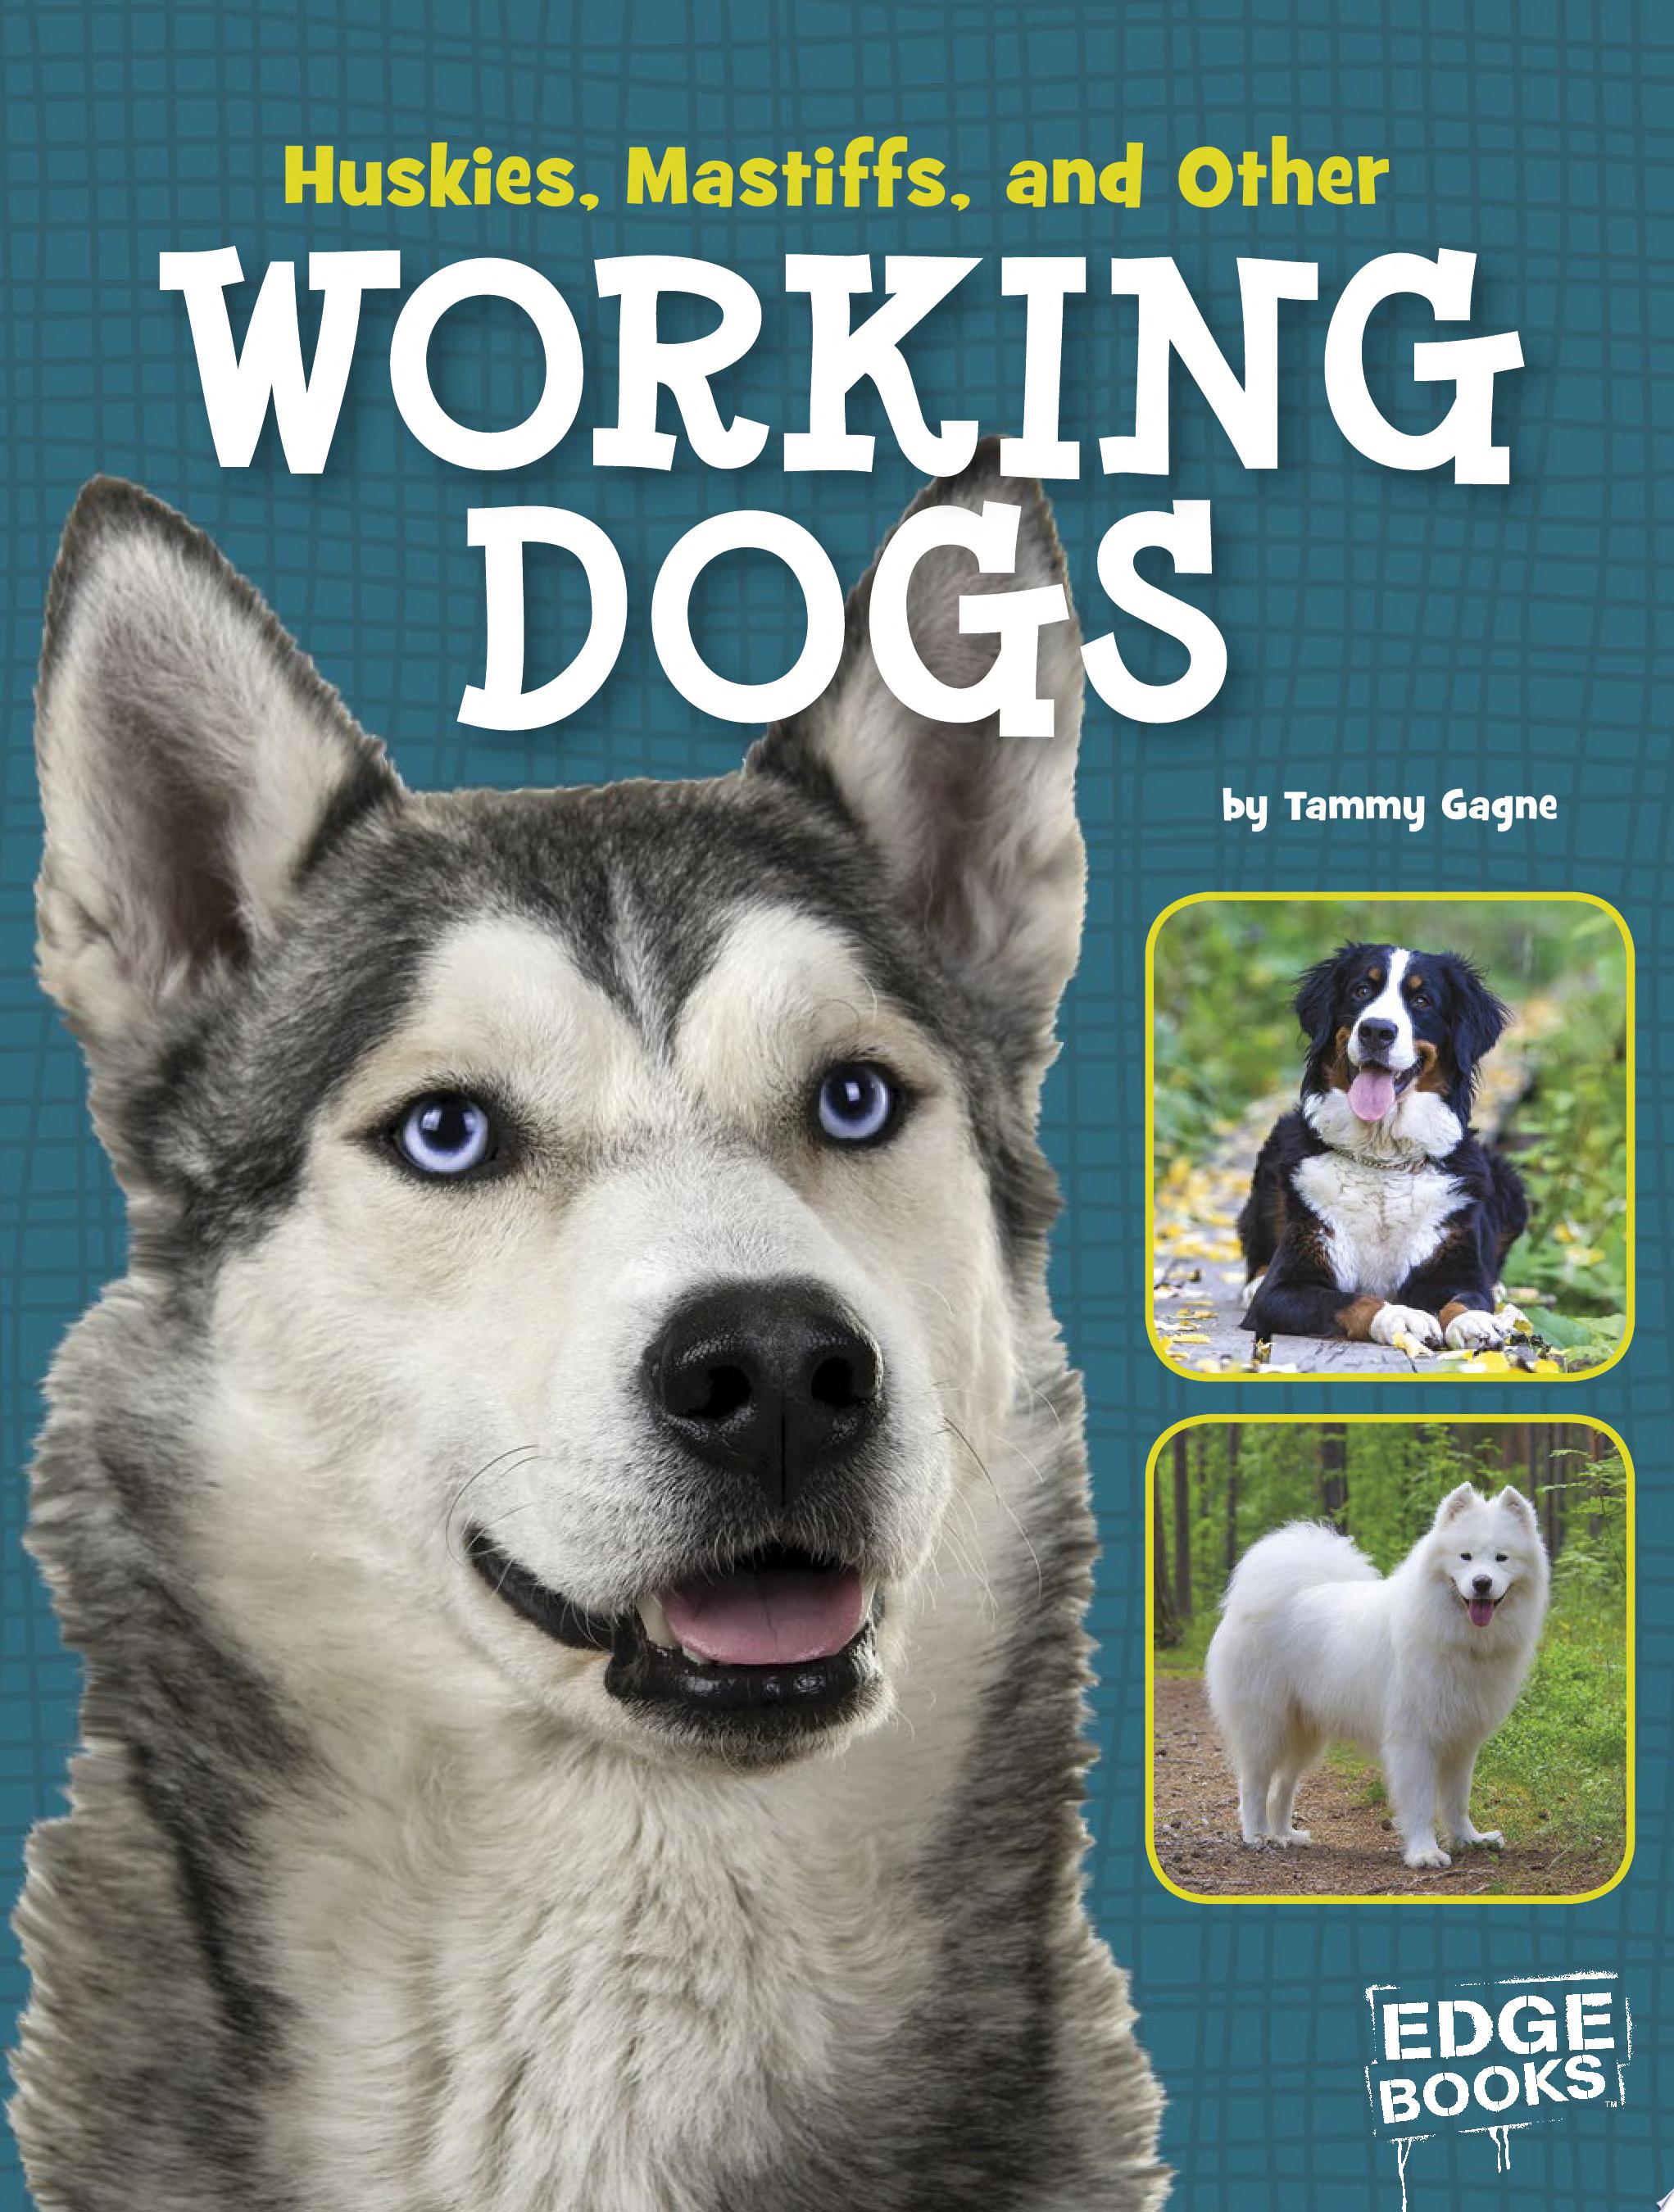 Image for "Huskies, Mastiffs, and Other Working Dogs"